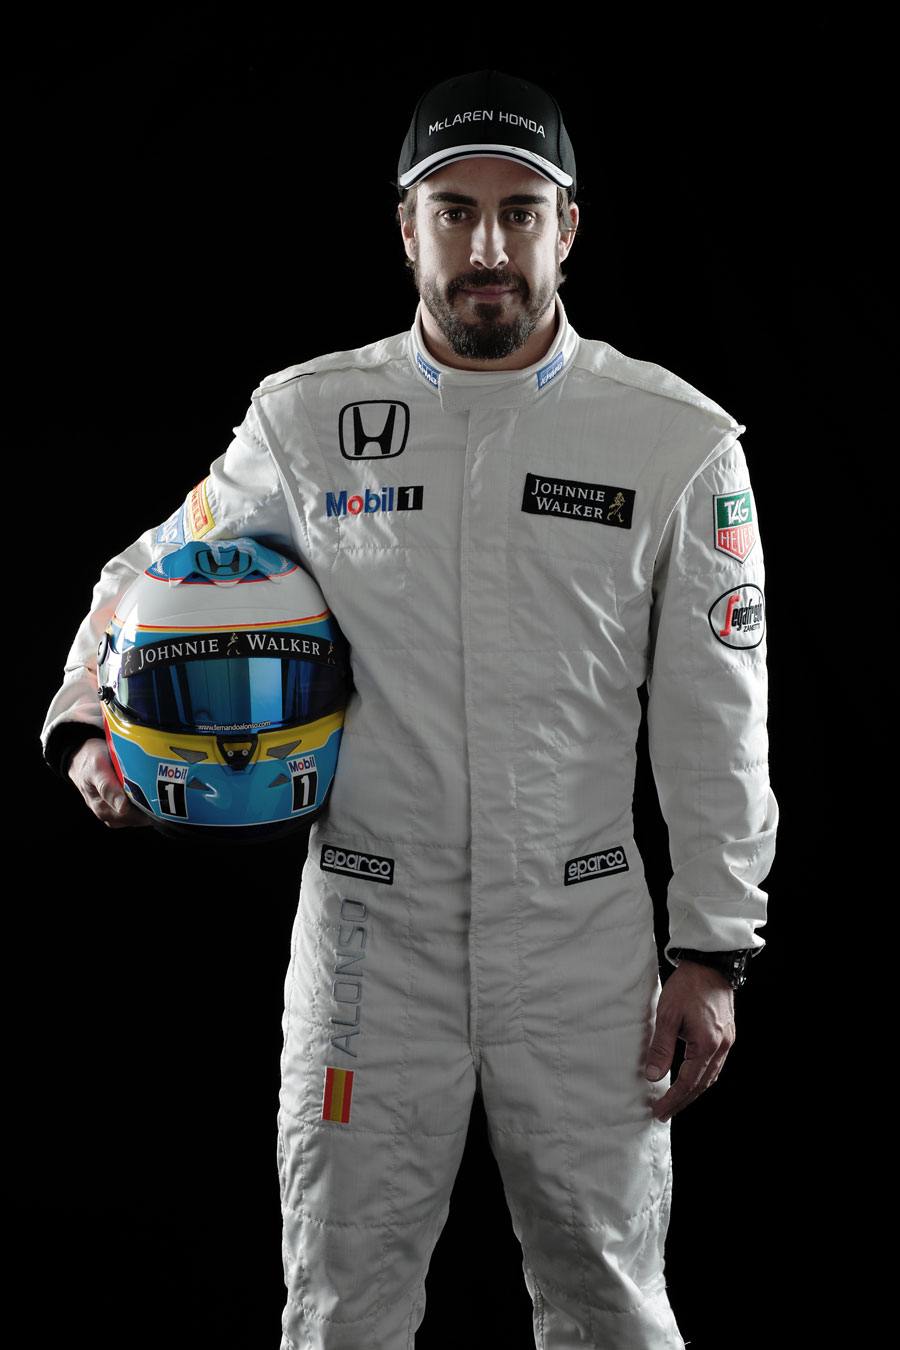 Fernando Alonso poses for a photo in his new McLaren overalls